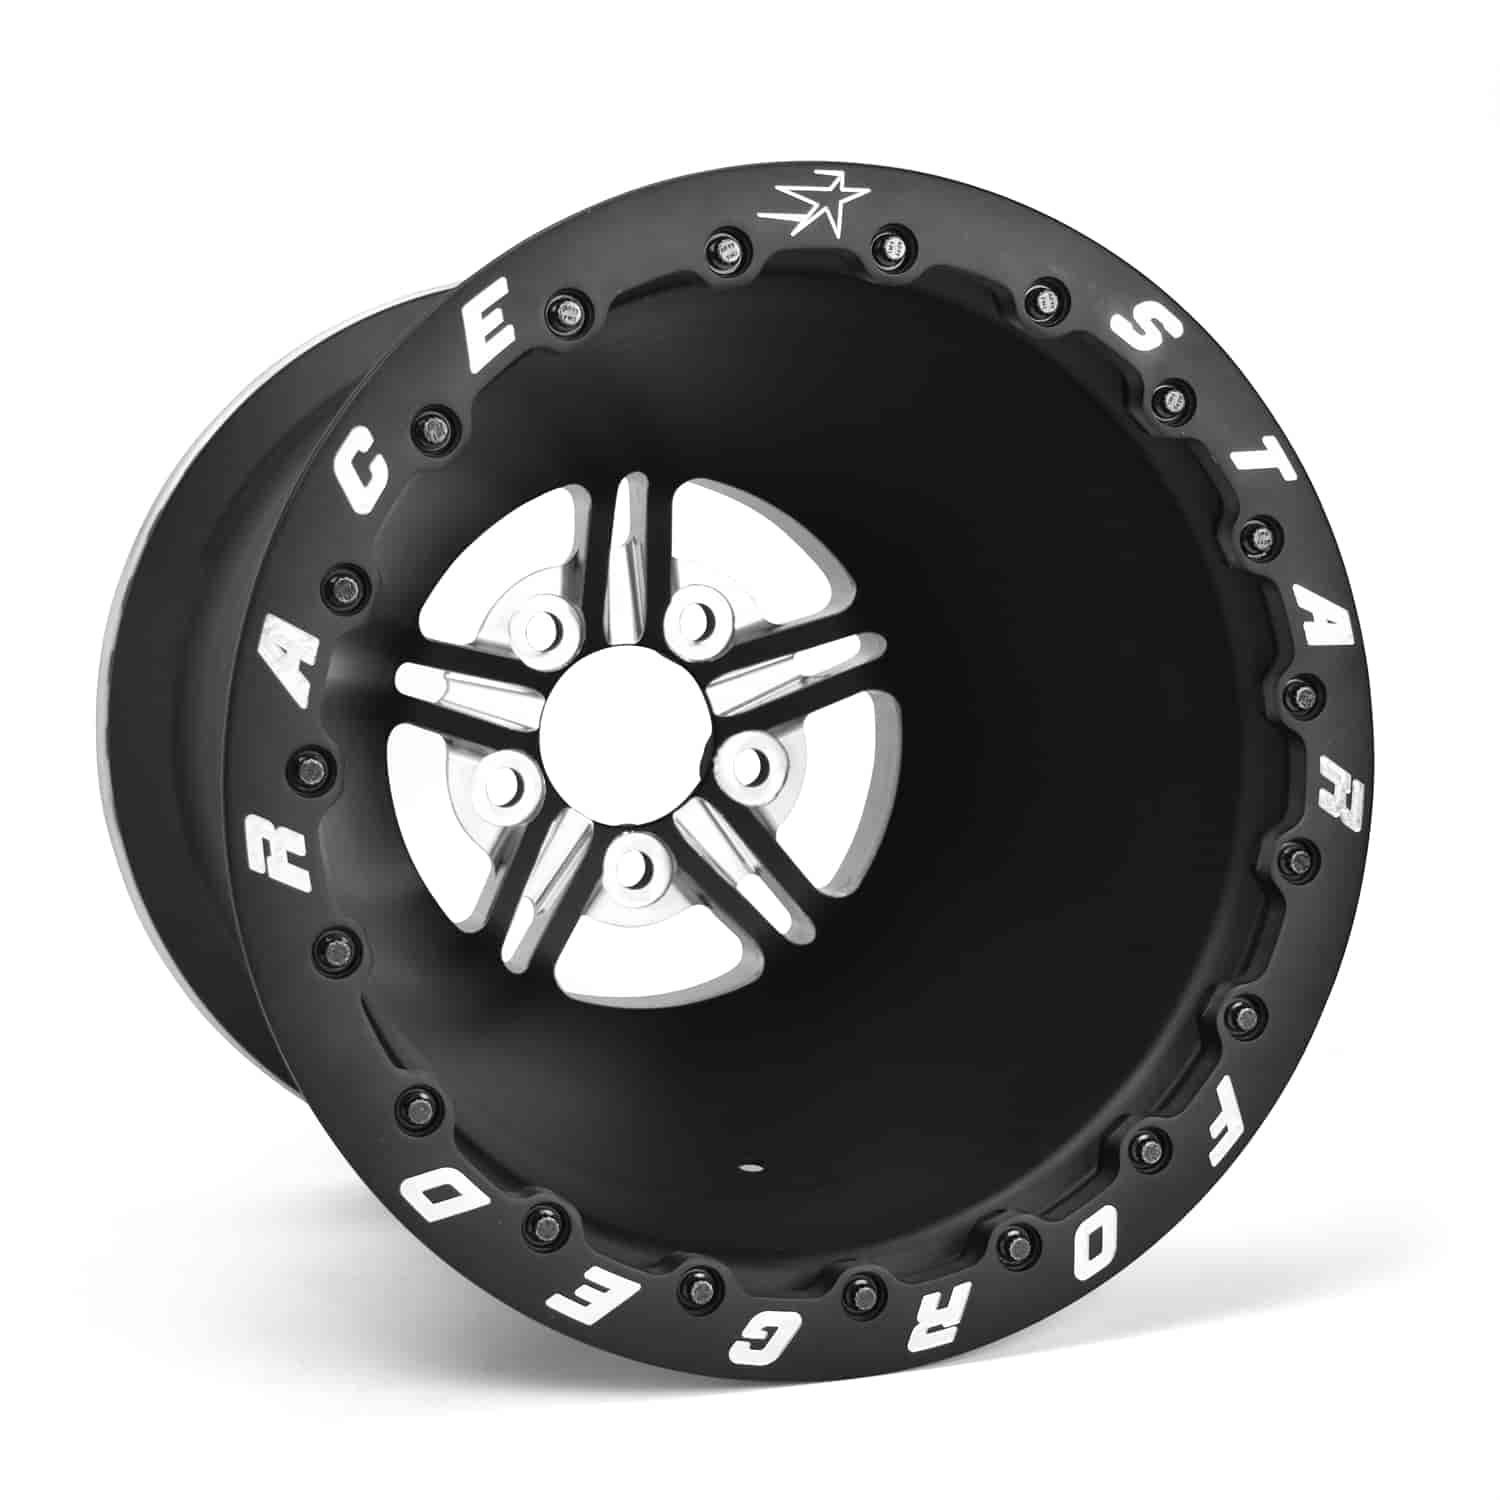 63-Series Pro Forged Double Bead-Lock Wheel Size: 15" x 14"